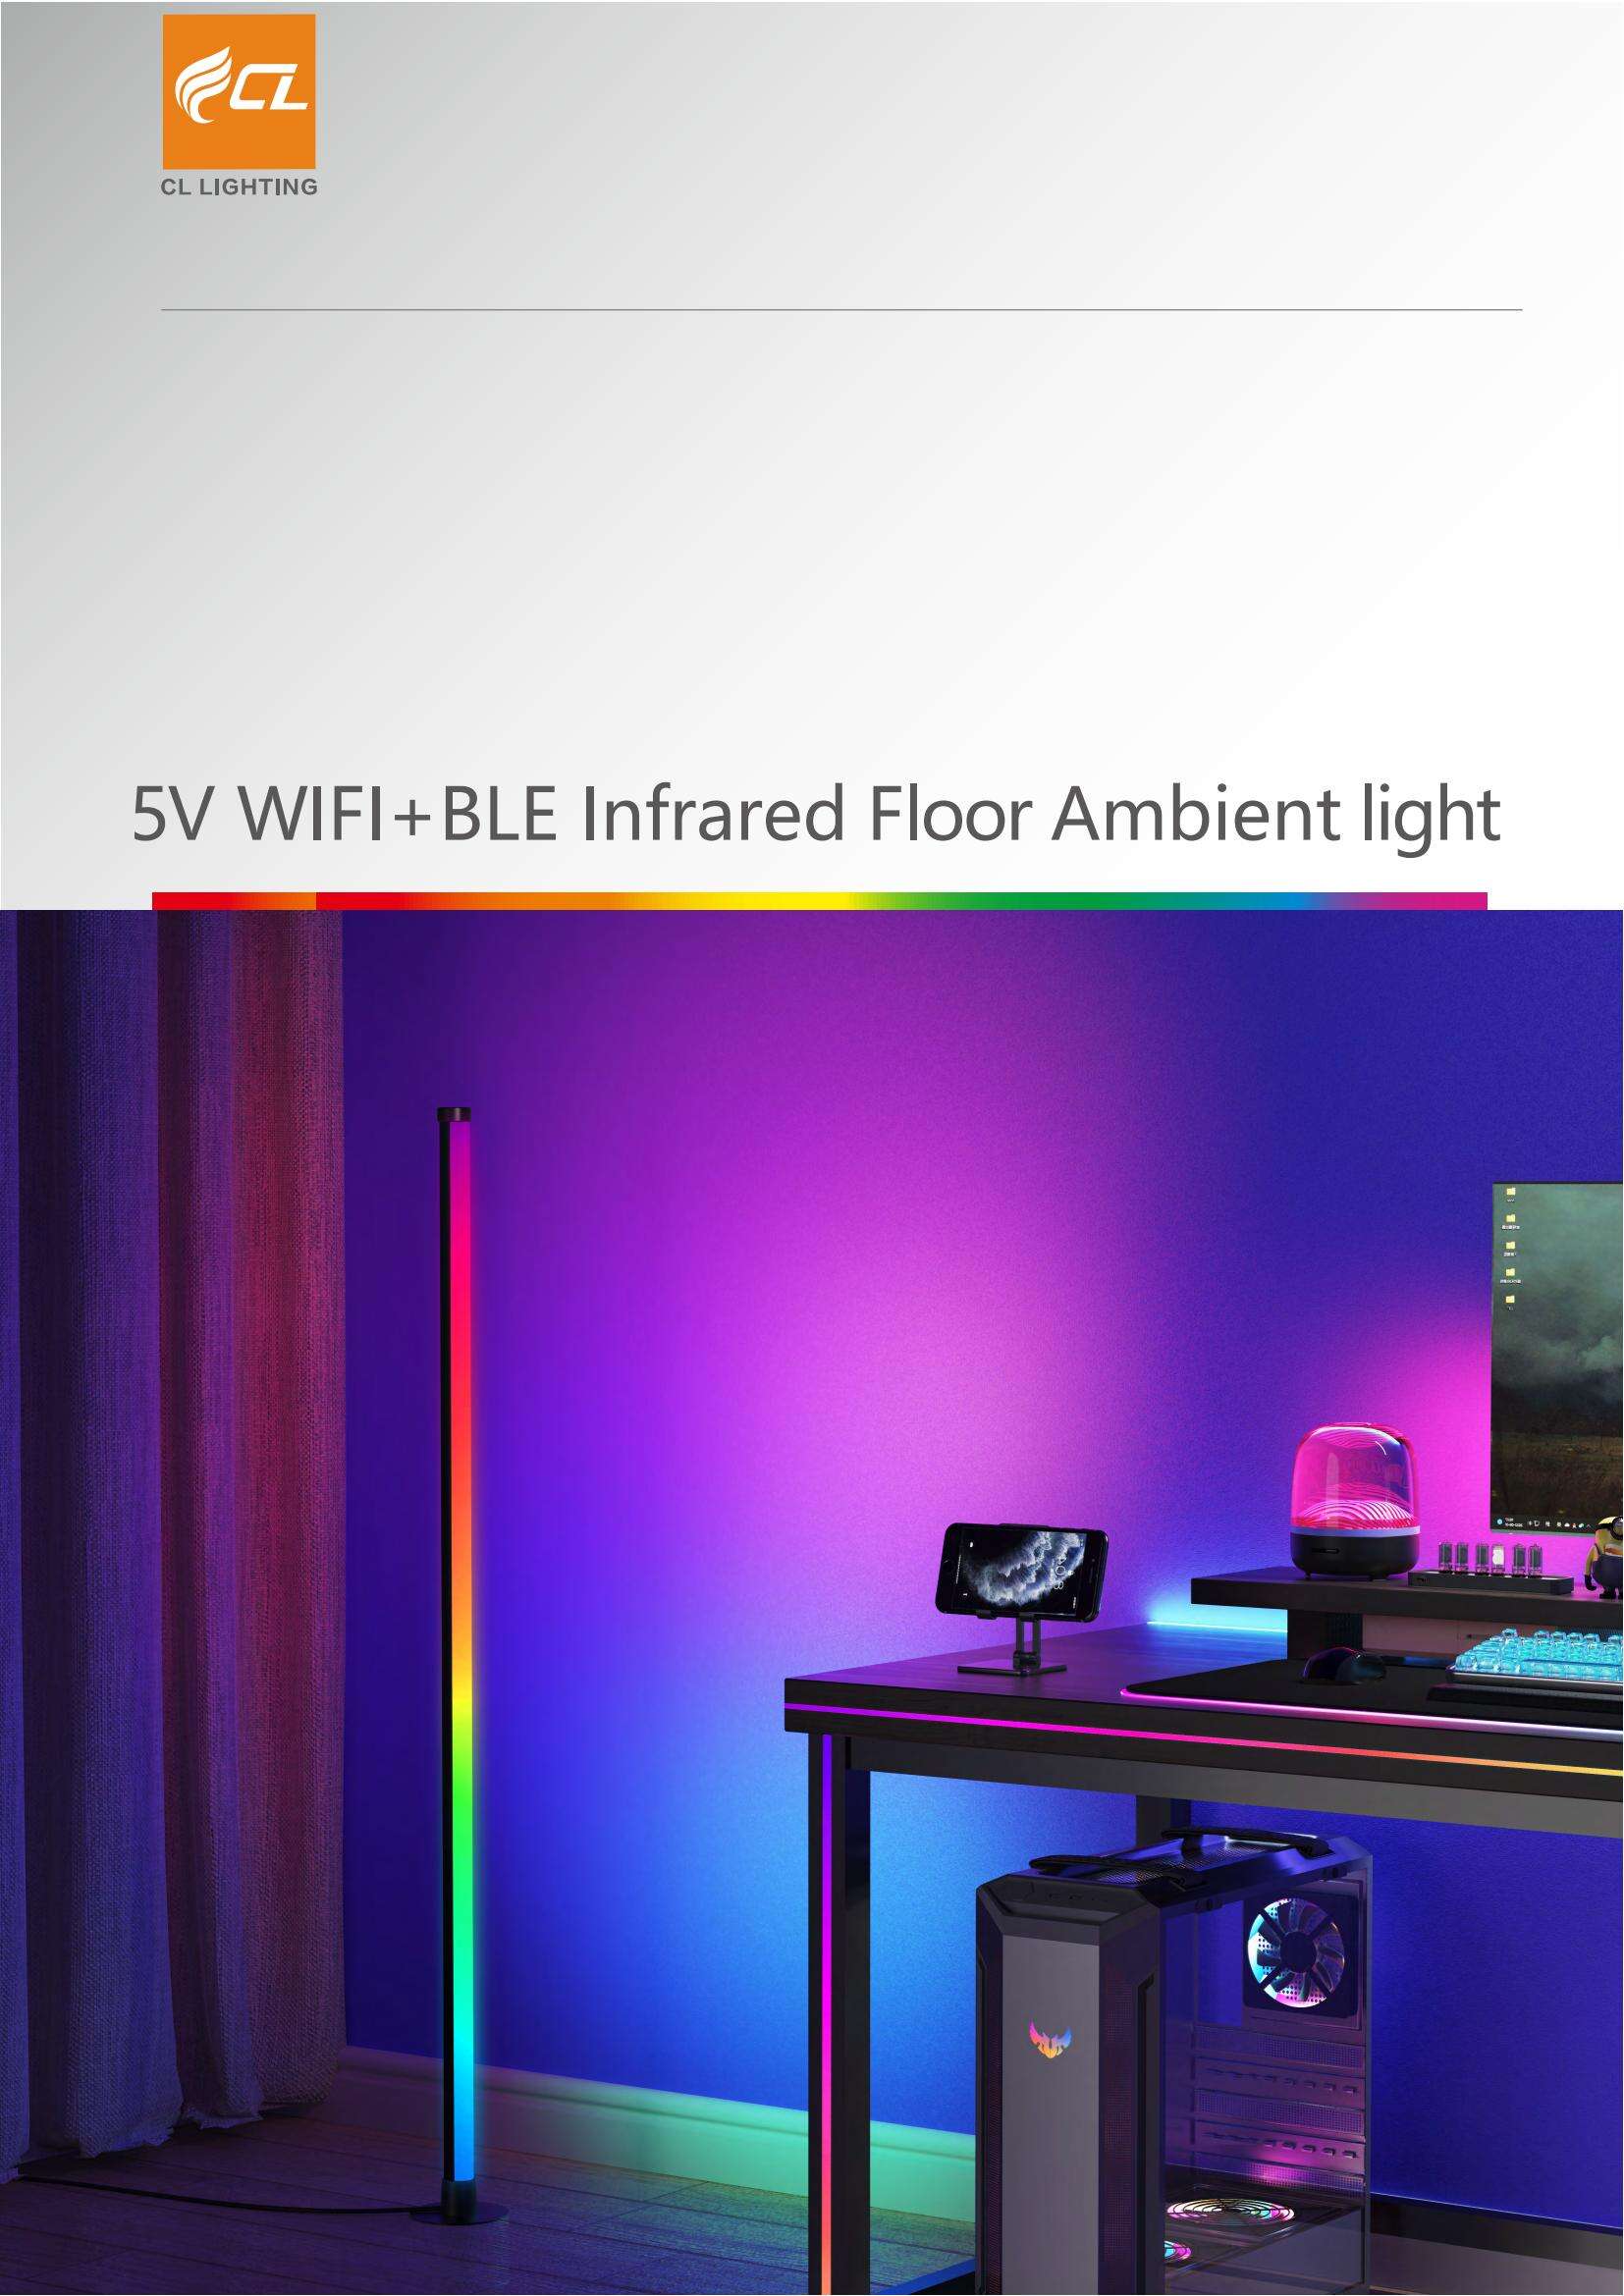 5V WiFi+BLE Infrared Floor Ambient Light manufacture